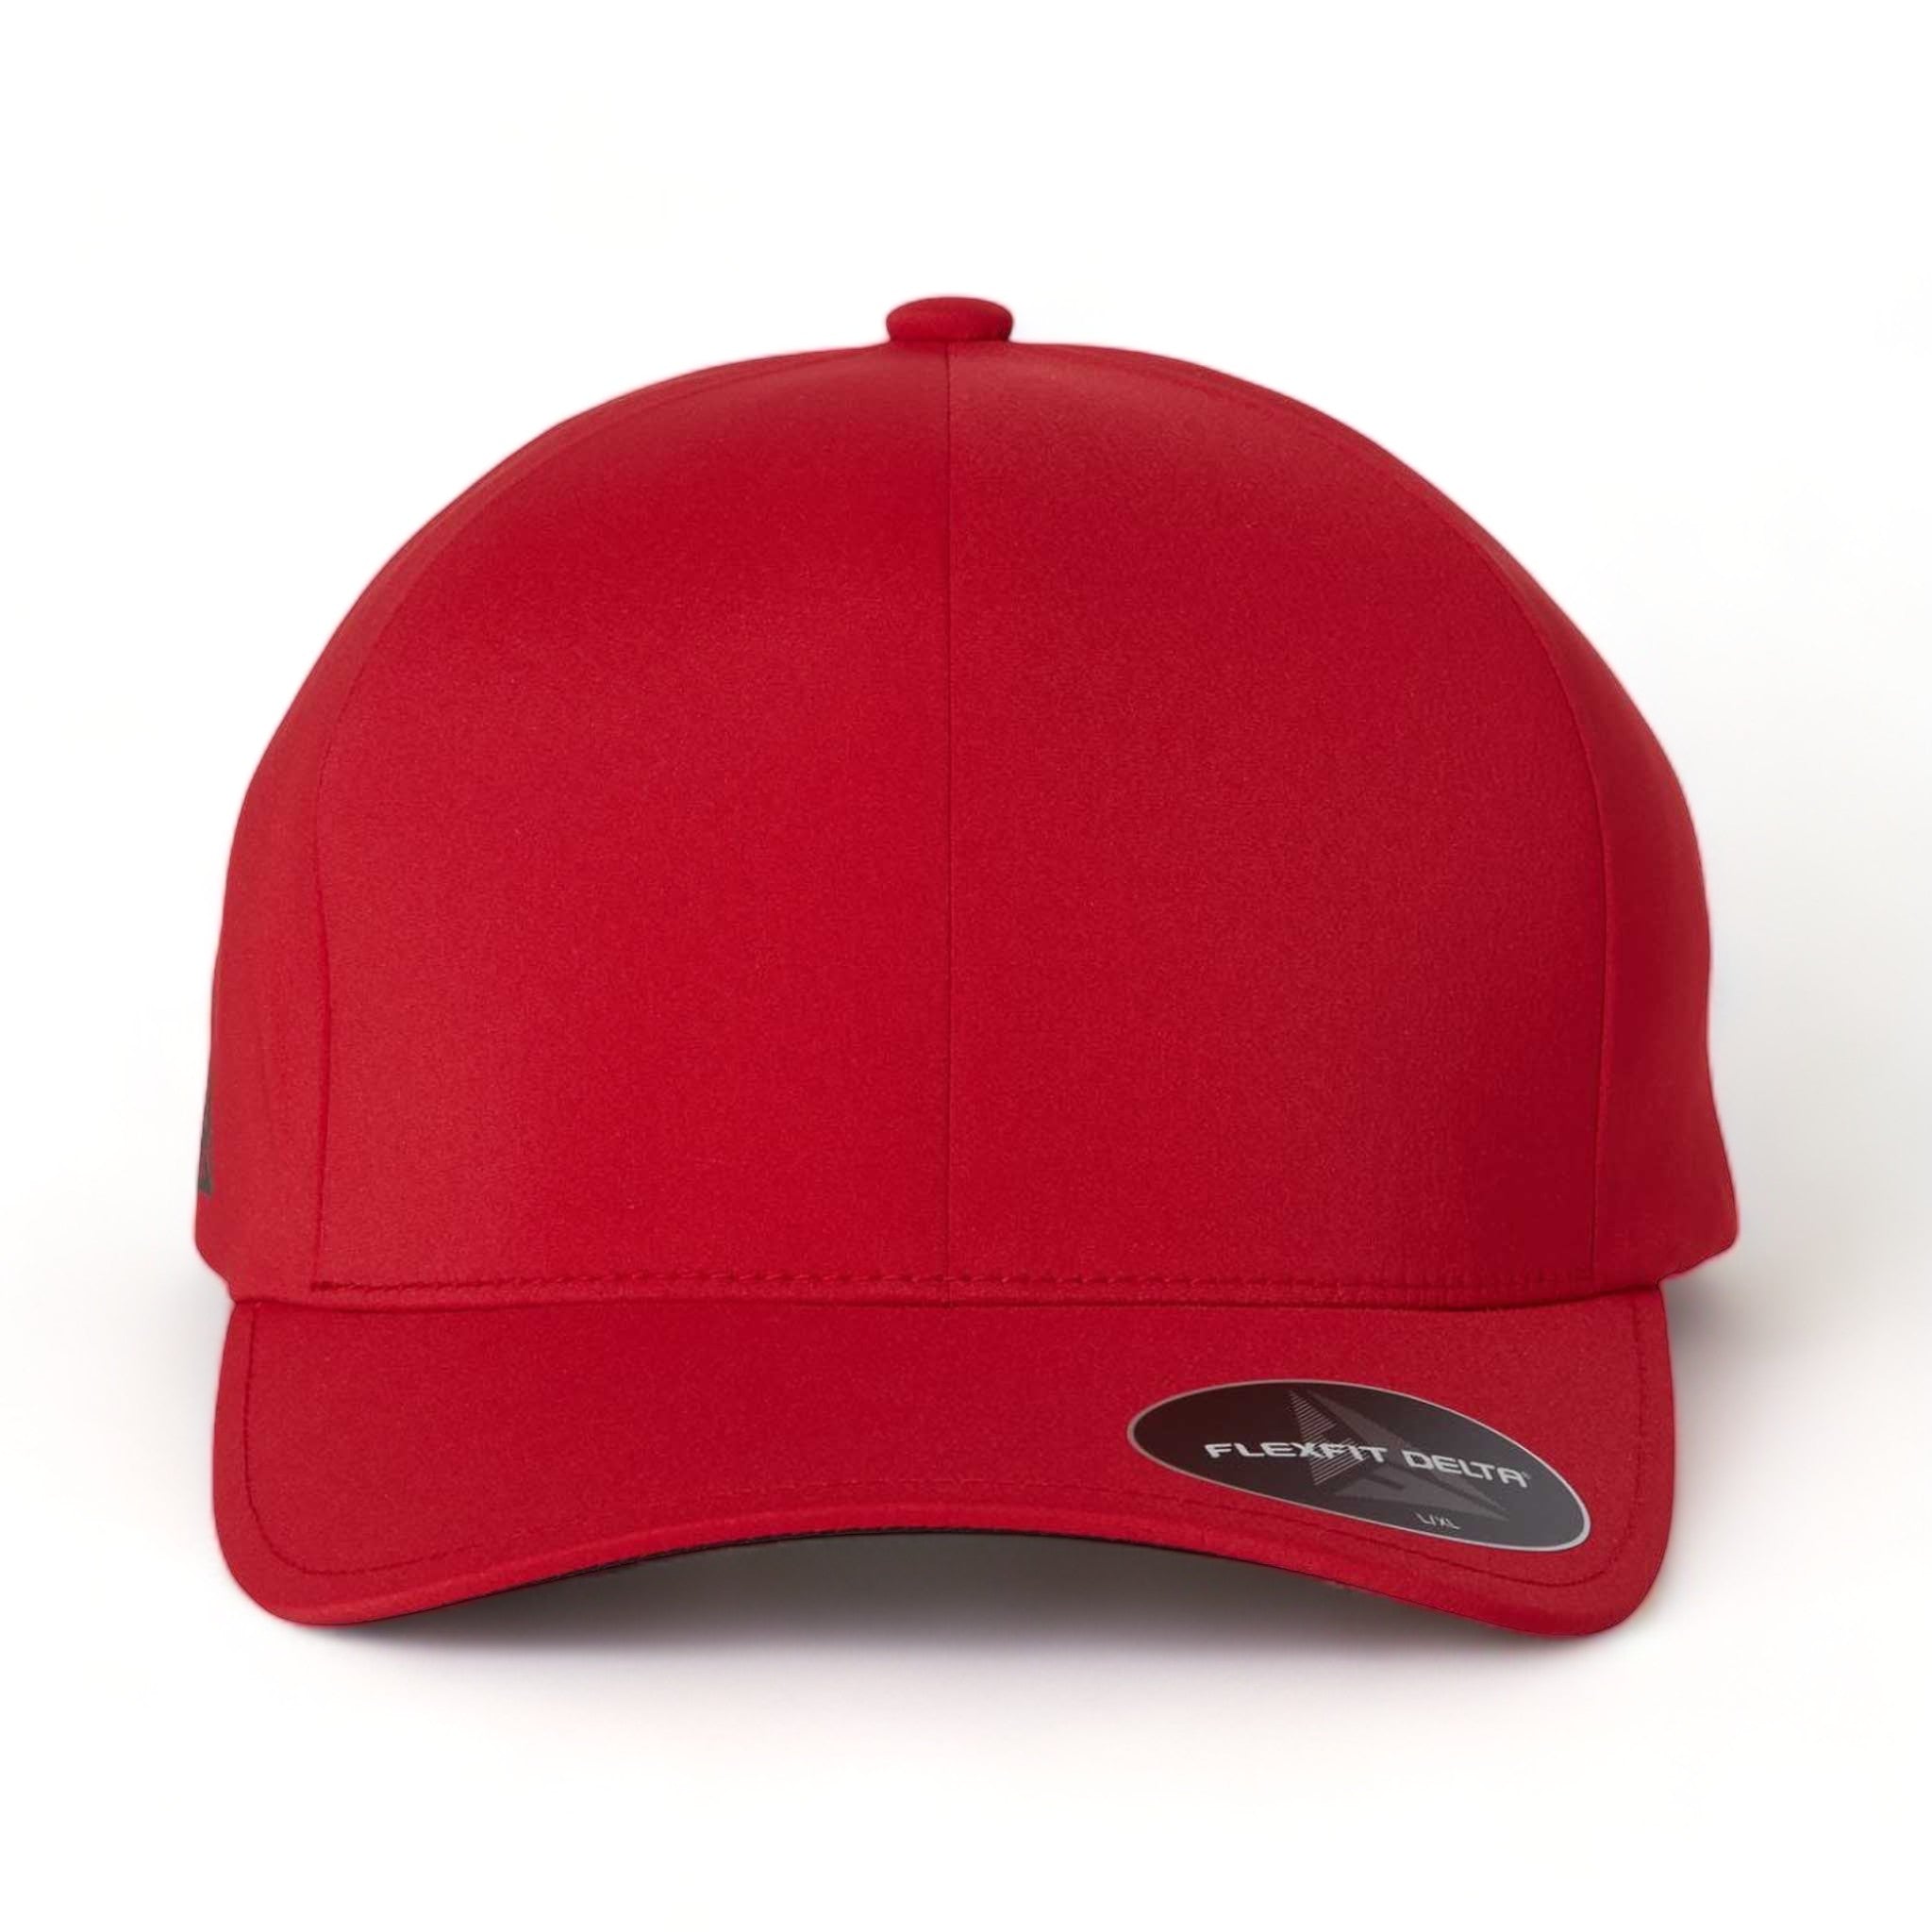 Front view of Flexfit 180 custom hat in red